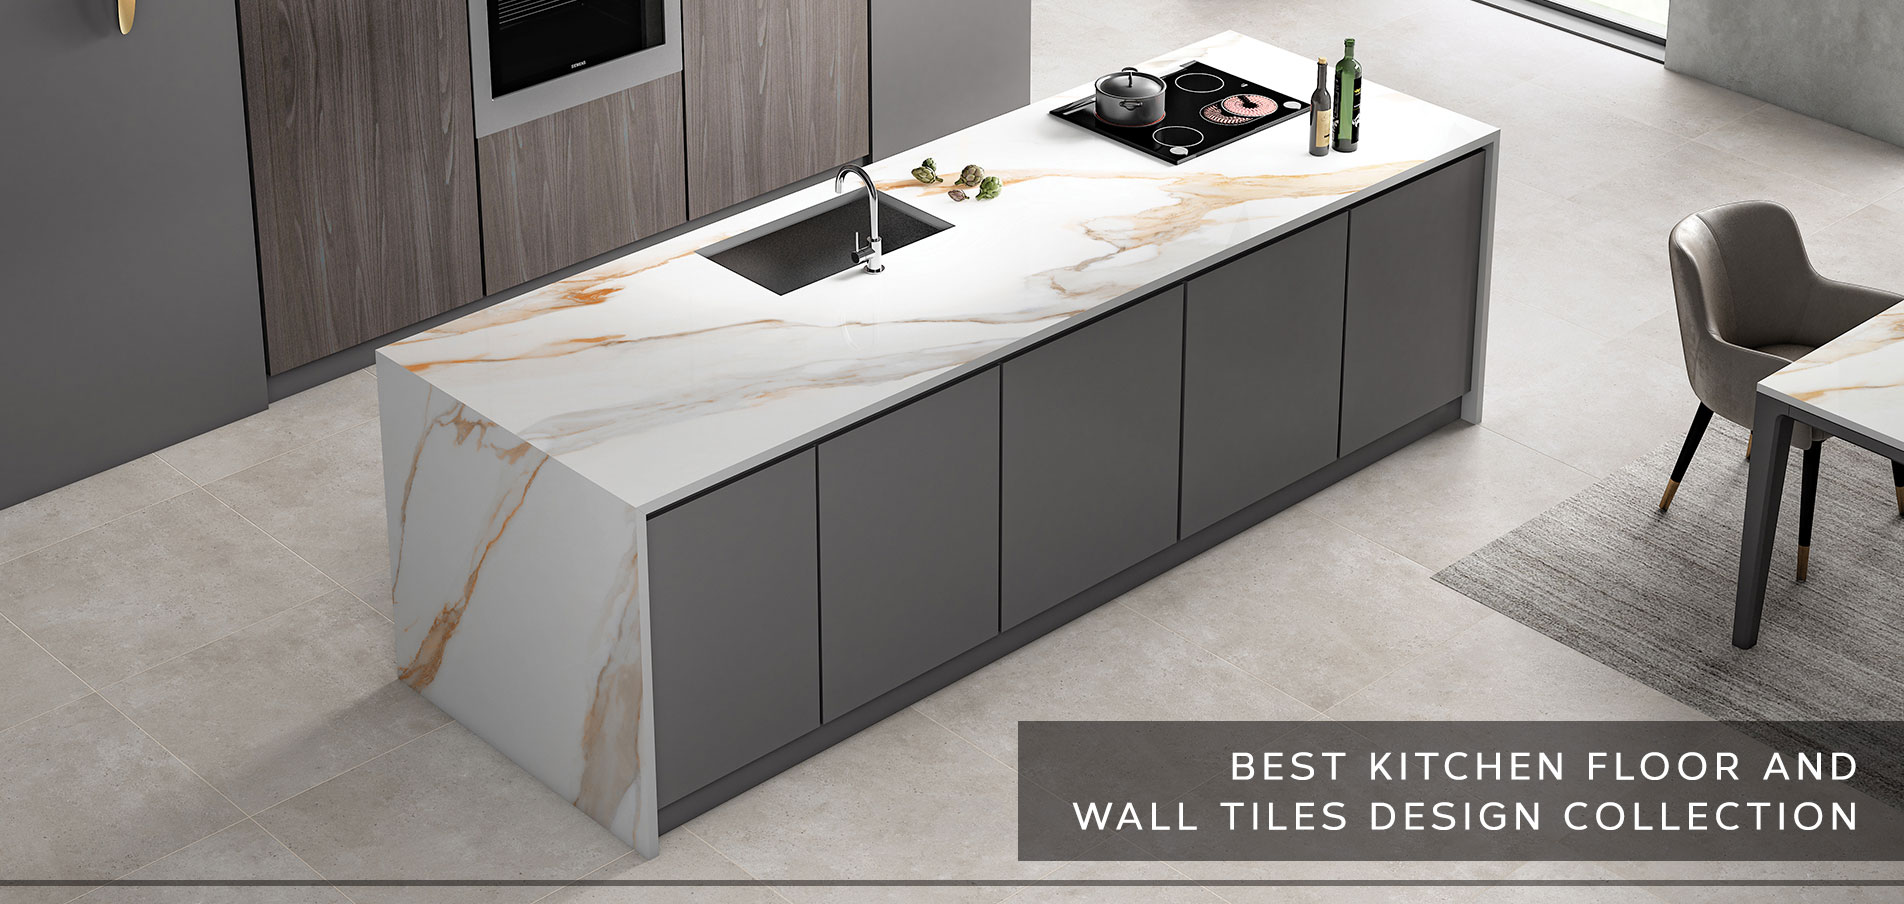 Best Kitchen Floor and Wall Tiles Design Collection